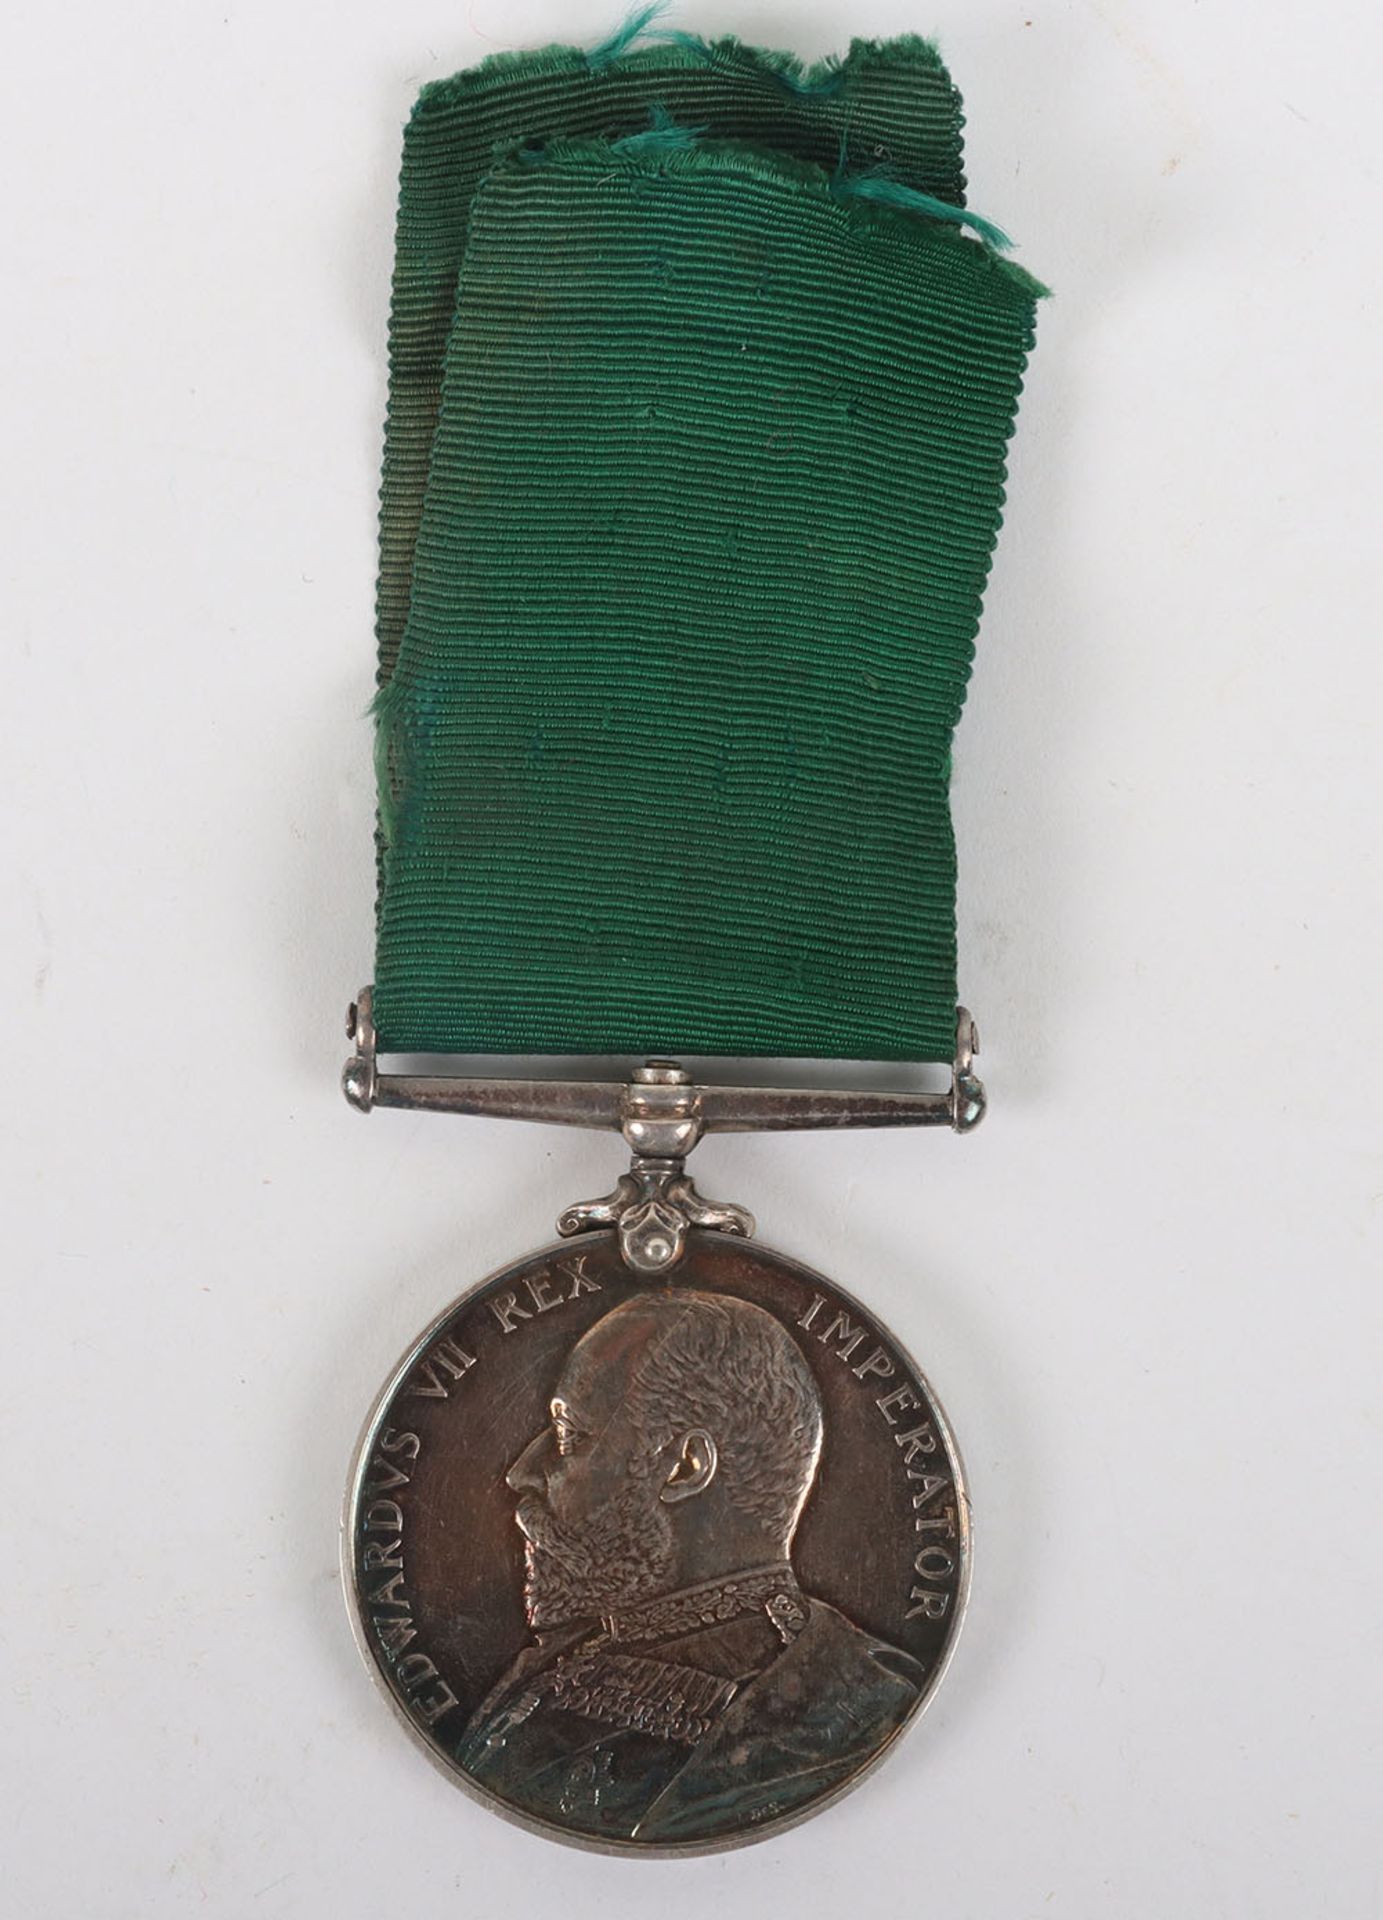 Edwardian Volunteer Long Service Medal to a Colour Sergeant in the Volunteer Battalion of the Hampsh